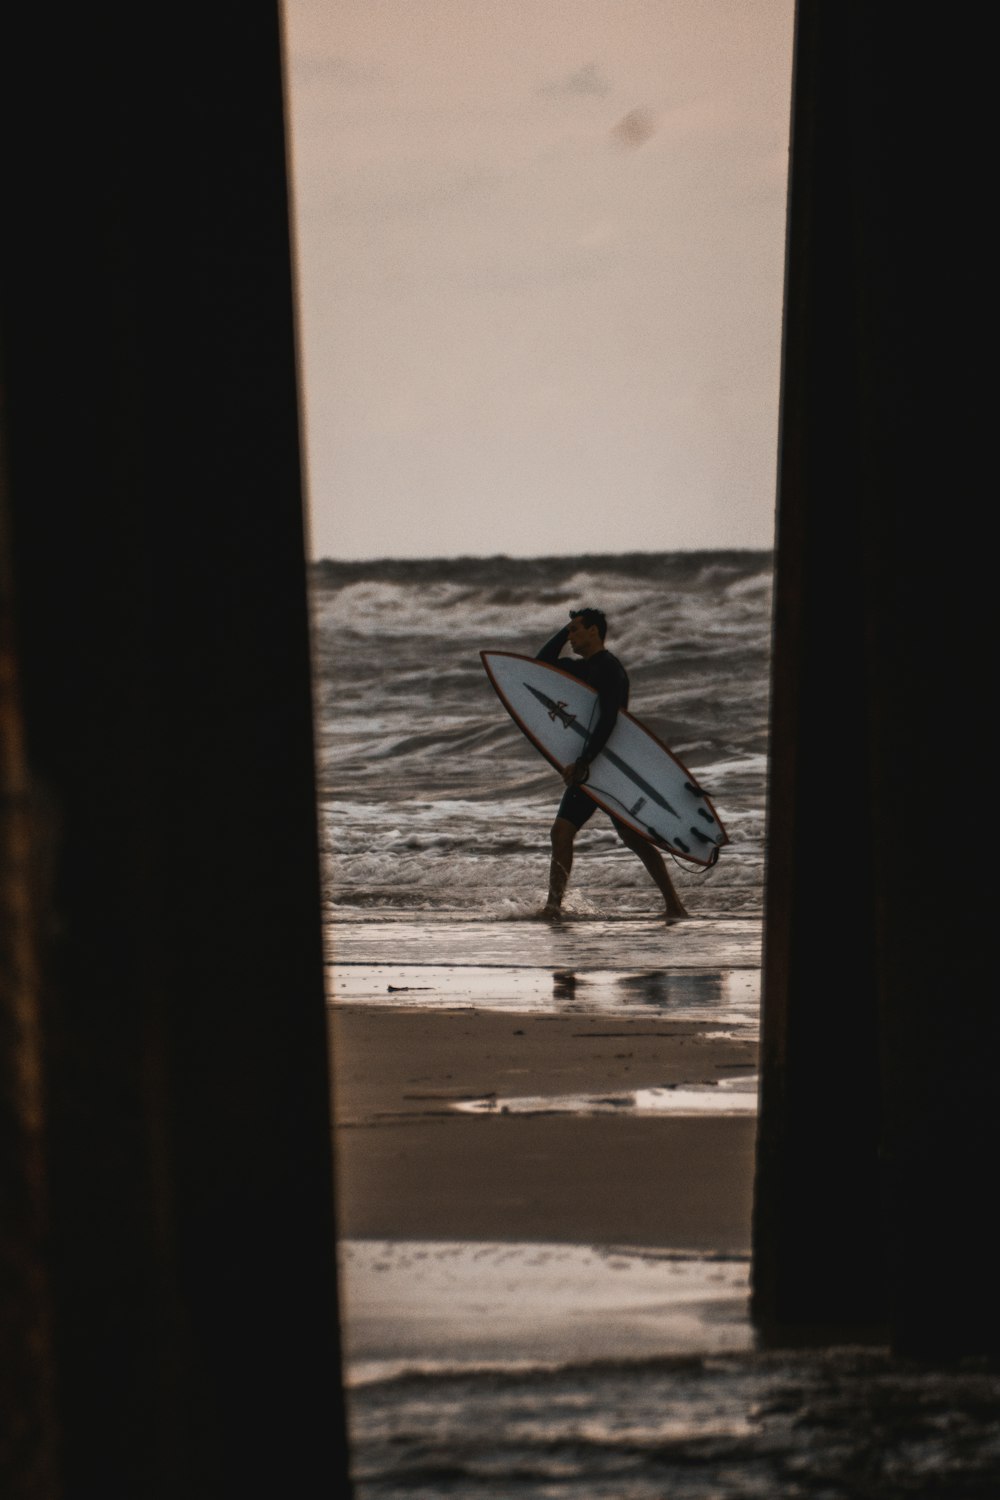 a man carrying a surfboard out of the ocean